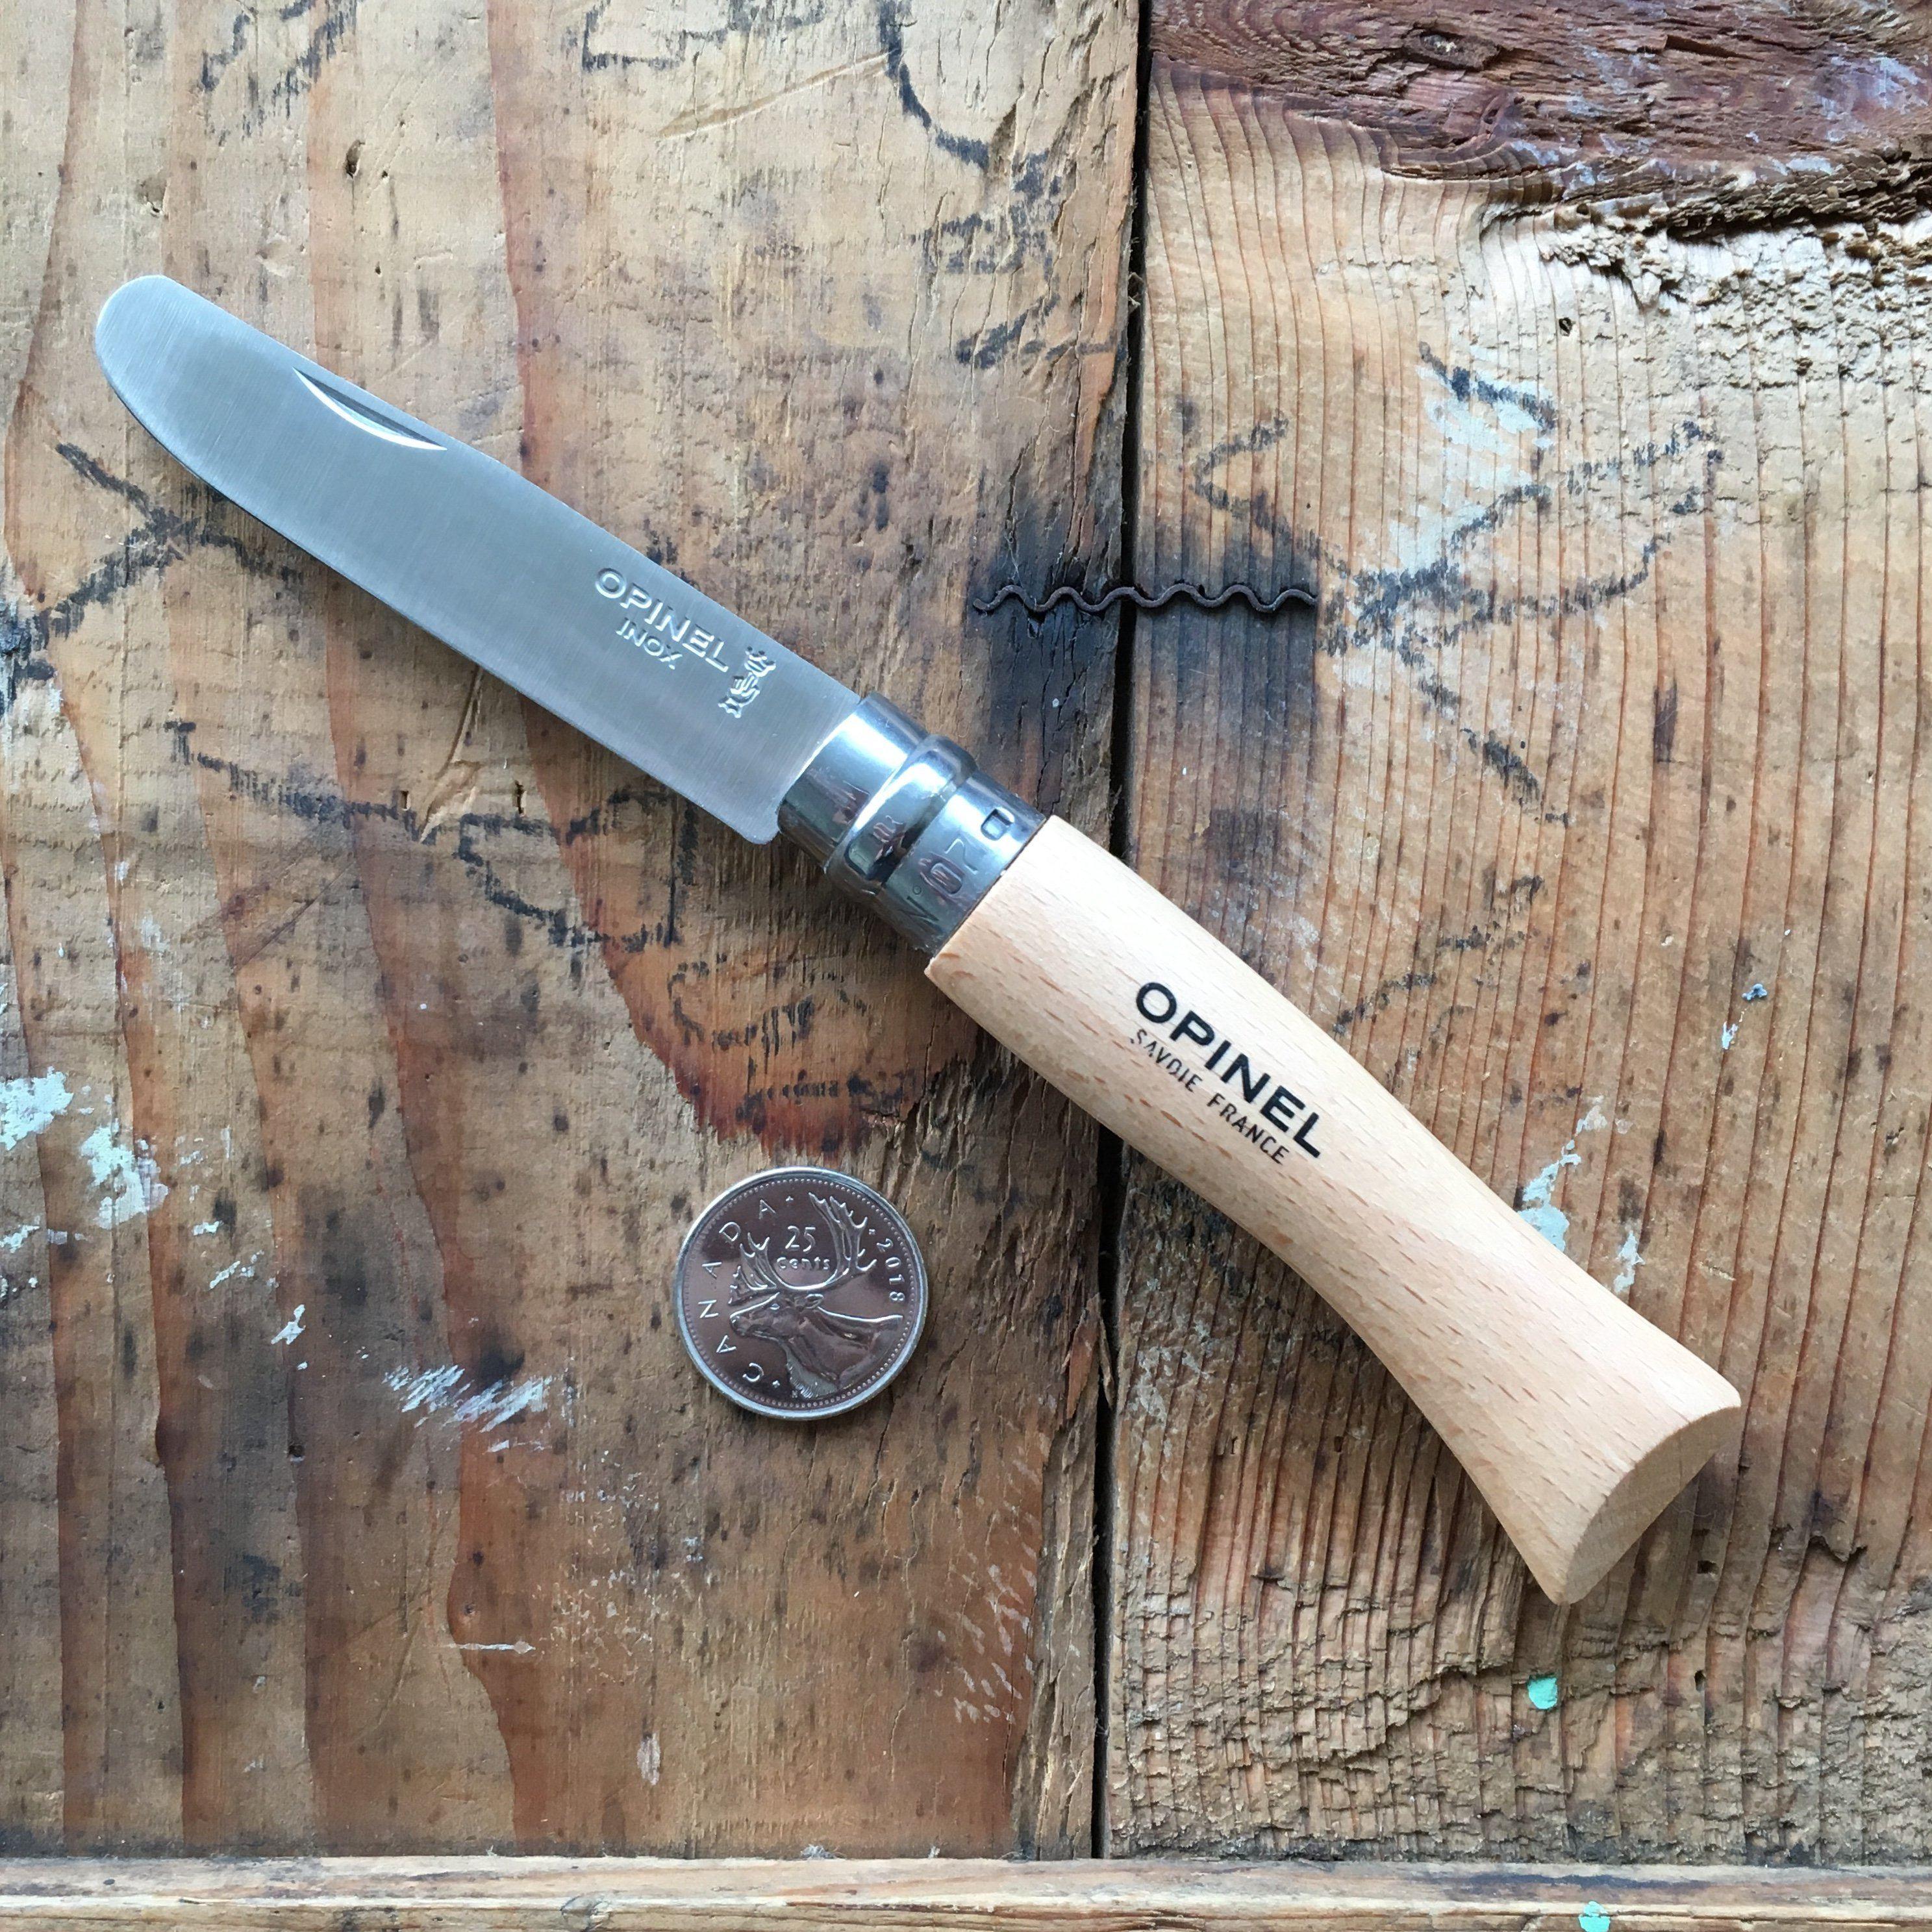 Opinel: My First Opinel knife and case set